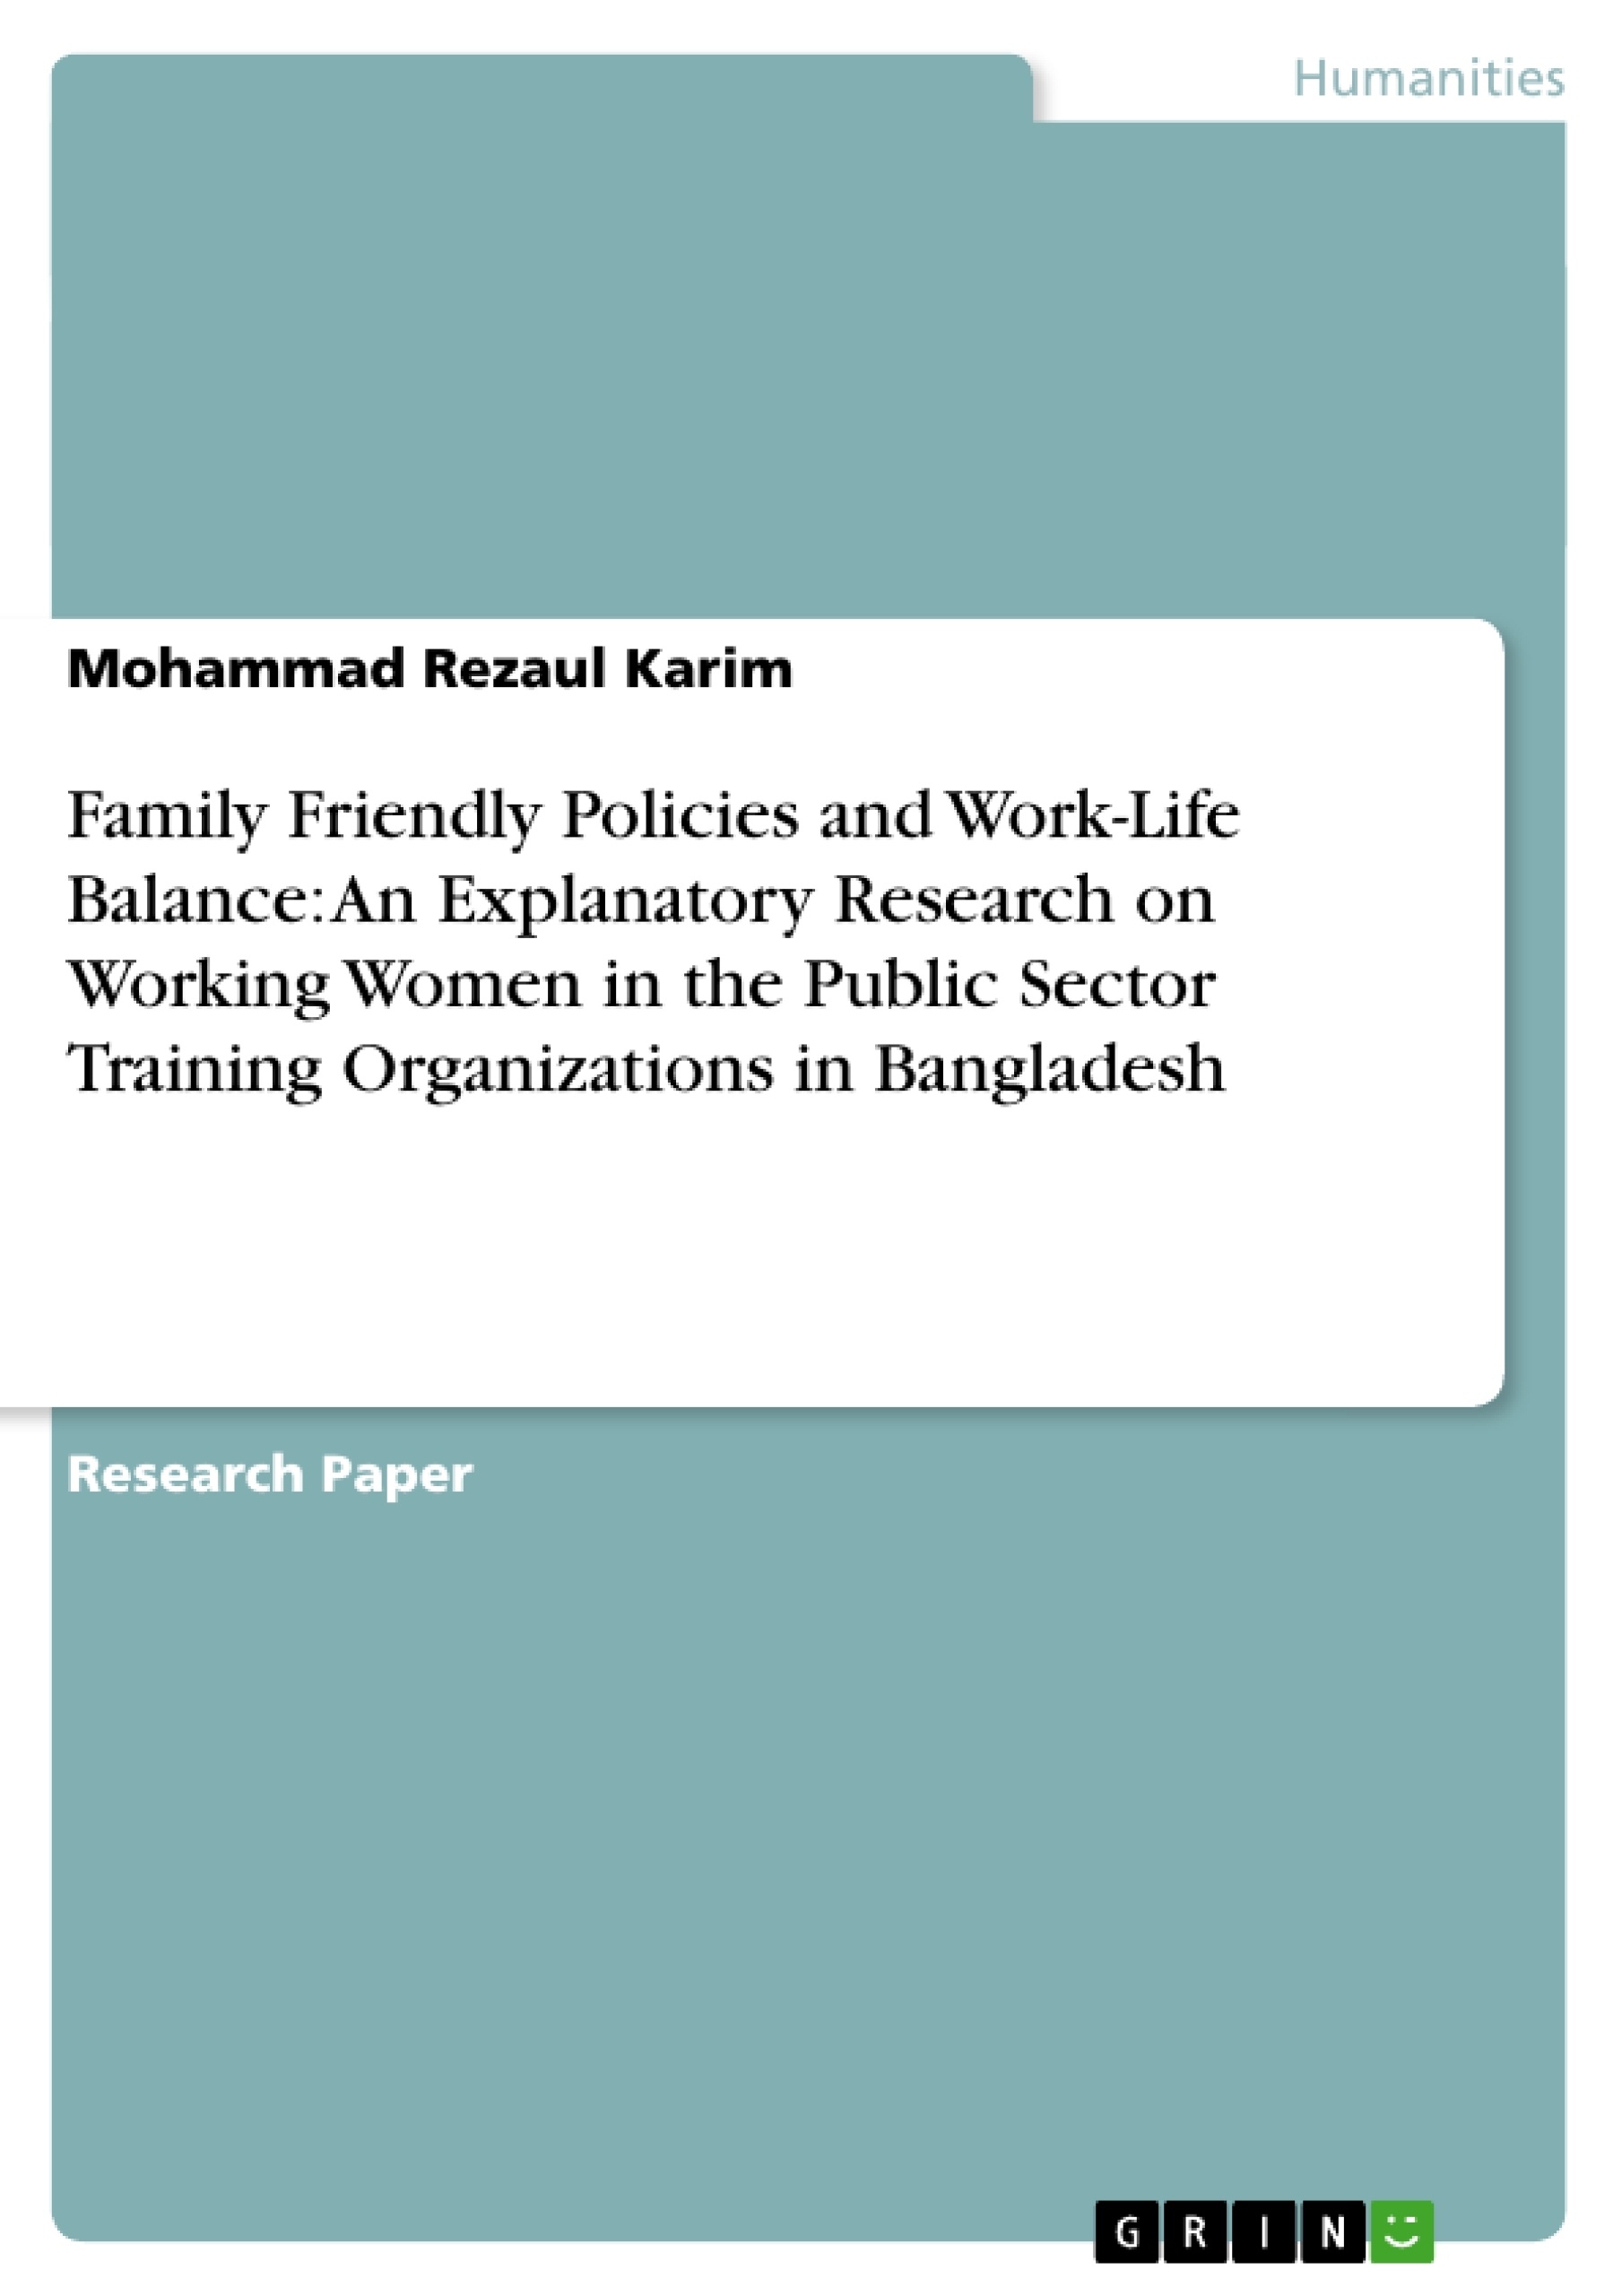 Title: Family Friendly Policies and Work-Life Balance: An Explanatory Research on Working Women in the Public Sector Training Organizations in Bangladesh